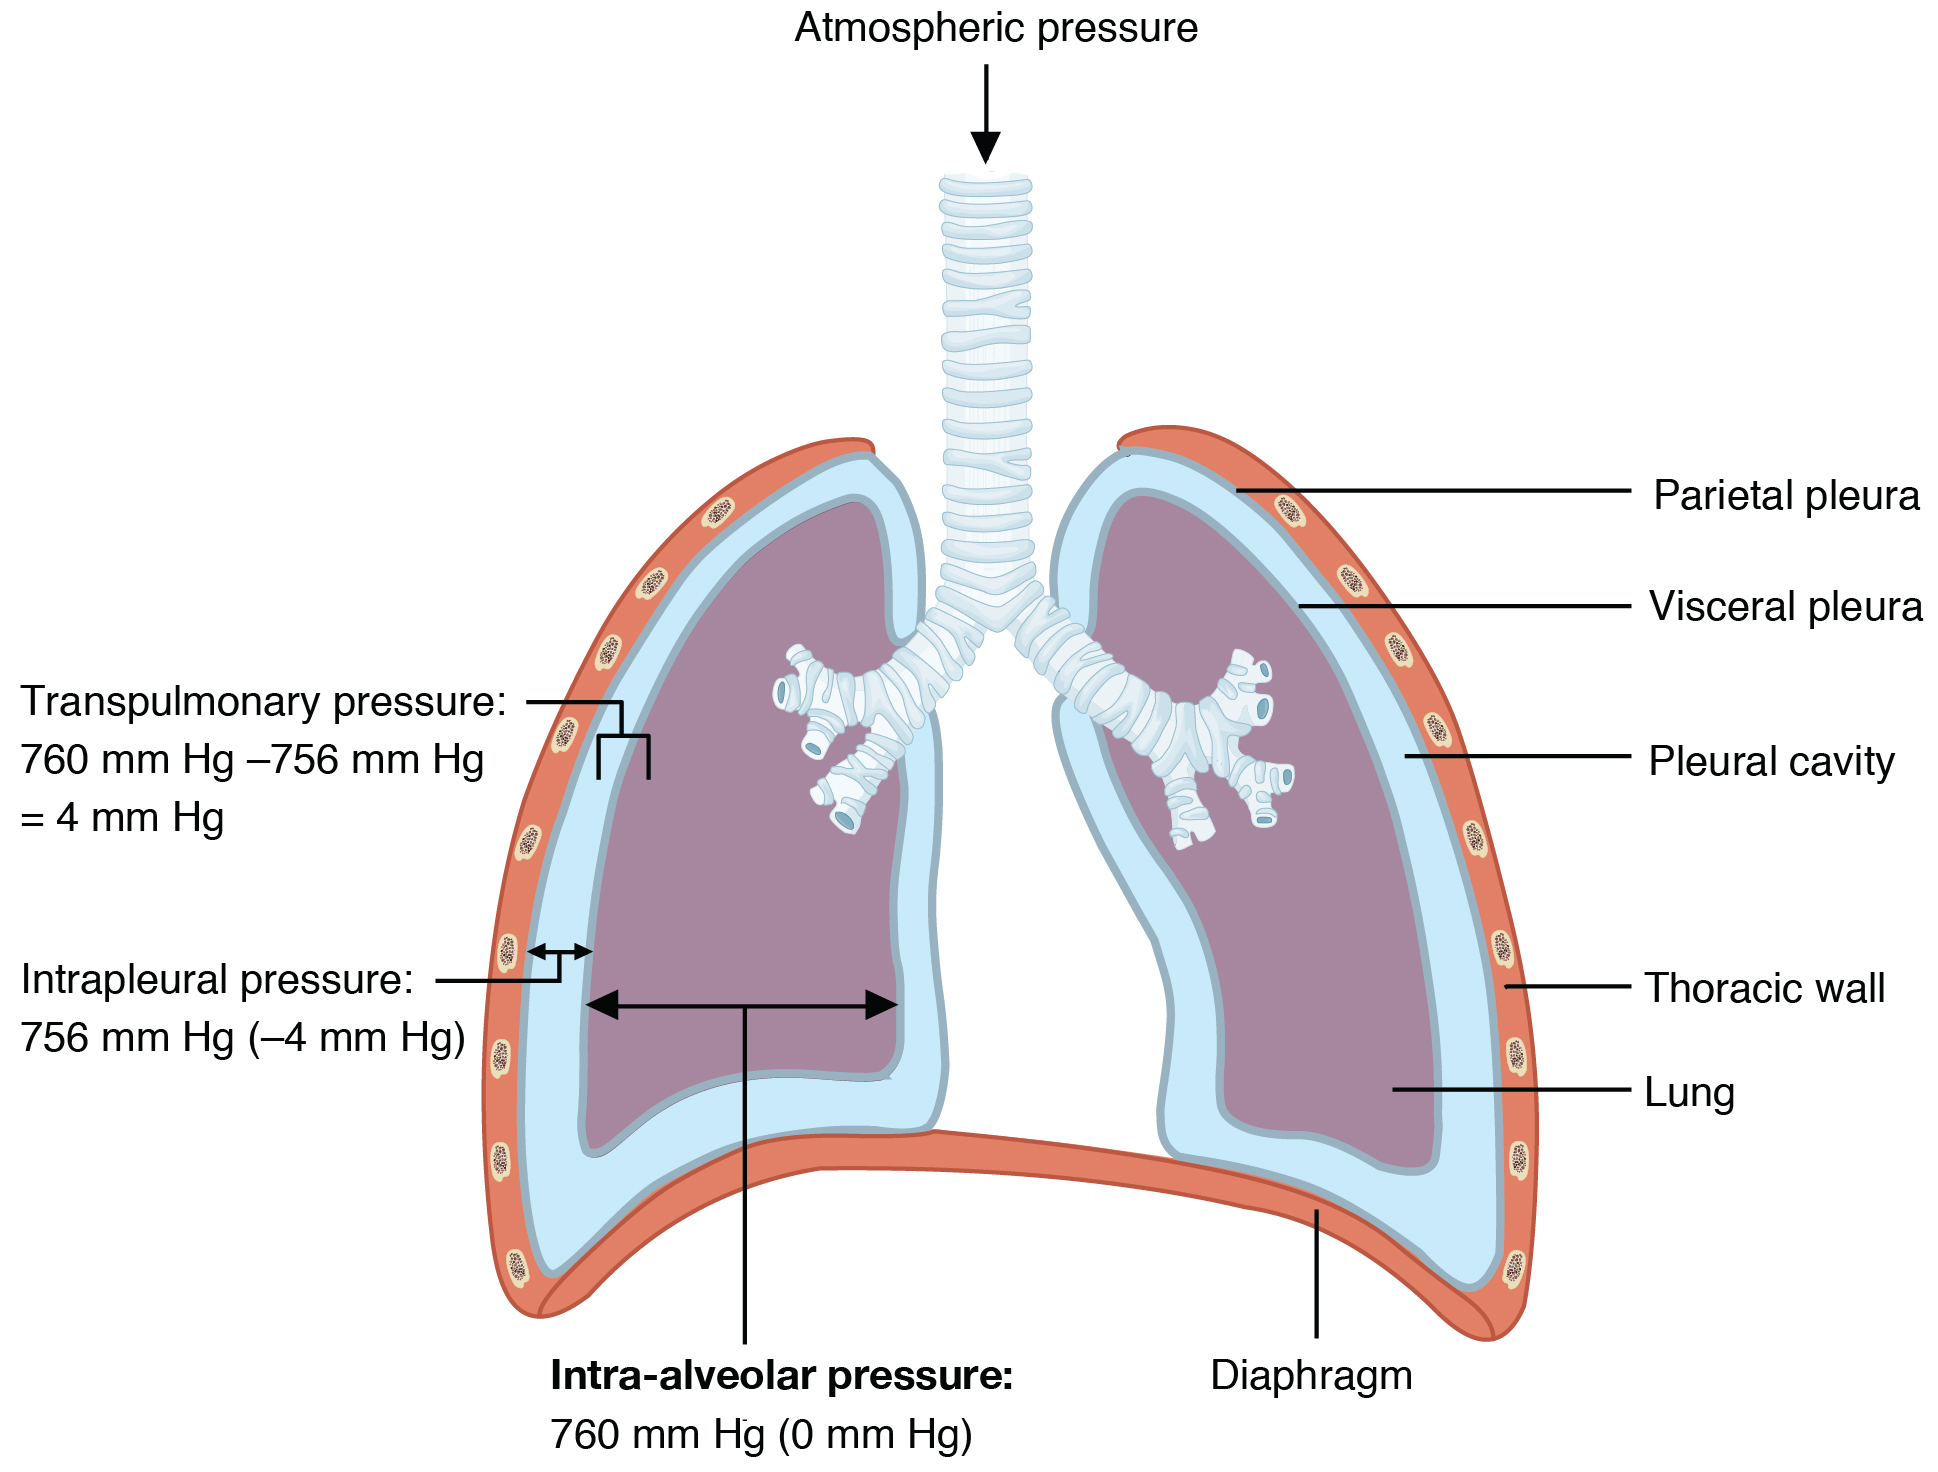 This diagram shows the lungs and the air pressure in different regions.